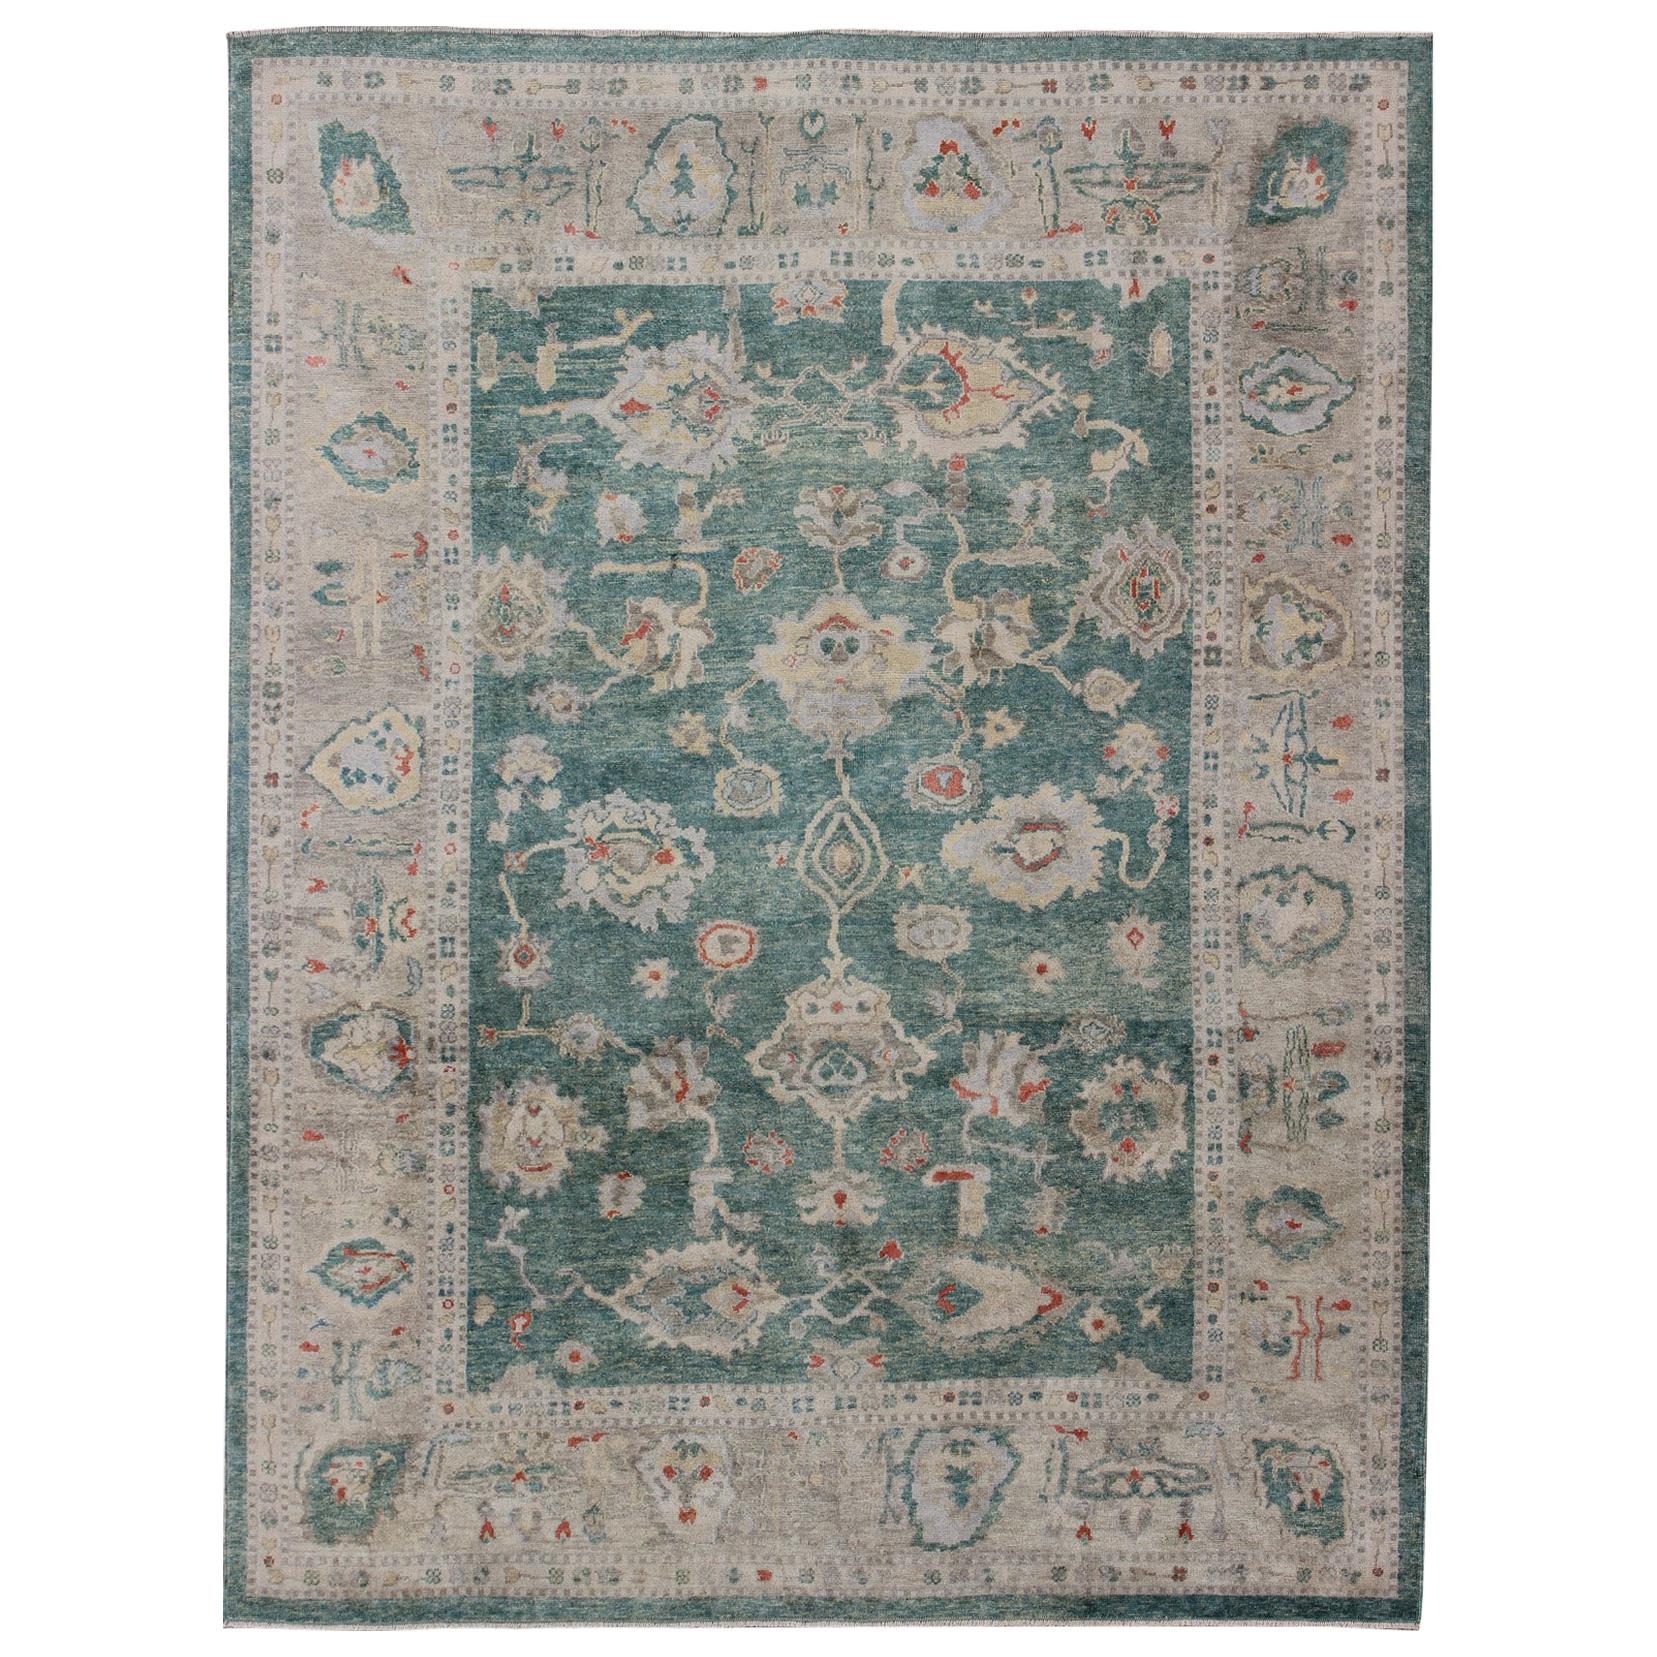 Green Color Turkish Oushak Rug Made with Hand Spun Wool & All-Over Design